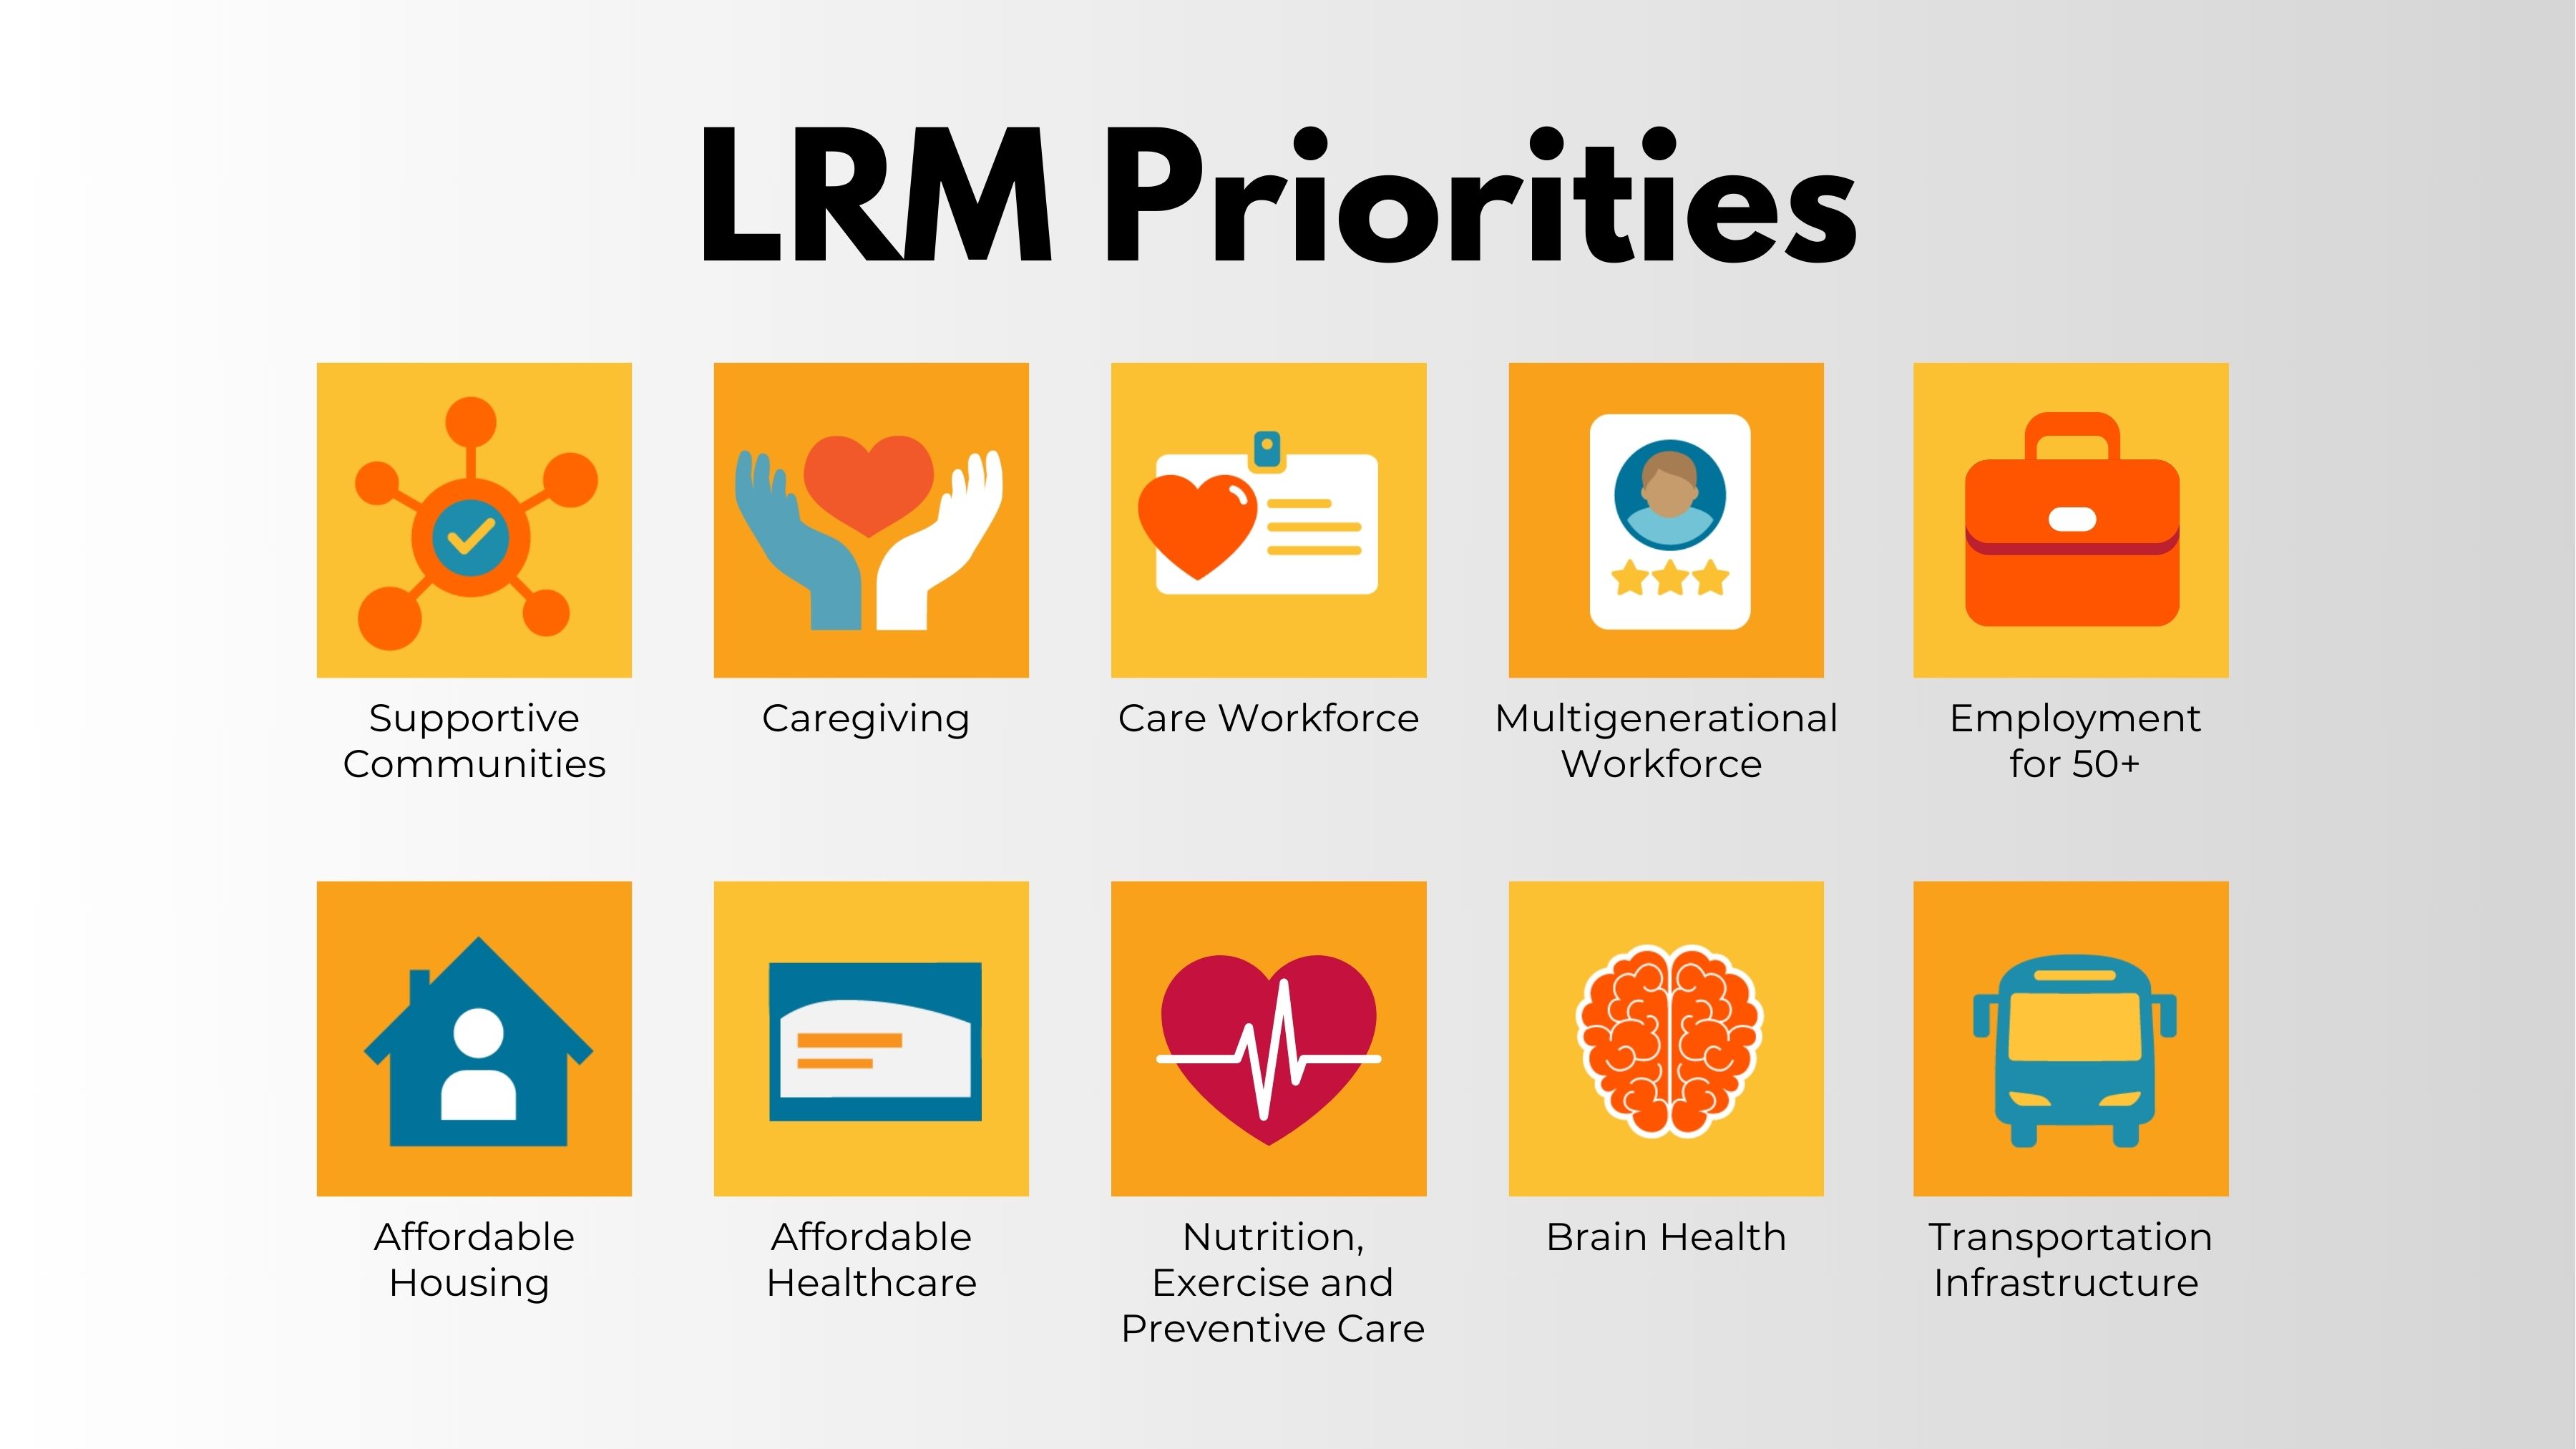 LR​​​M Priorities​​​​: Supportive Communities, Caregiving, Care Workforce, Multigenerational Workforce for Employers, Employment for 50+, Affordable Housing, Affordable Healthcare​, Nutrition, Exercise and Preventive Care, Brain Health, and Transportation Infrastructure.​​